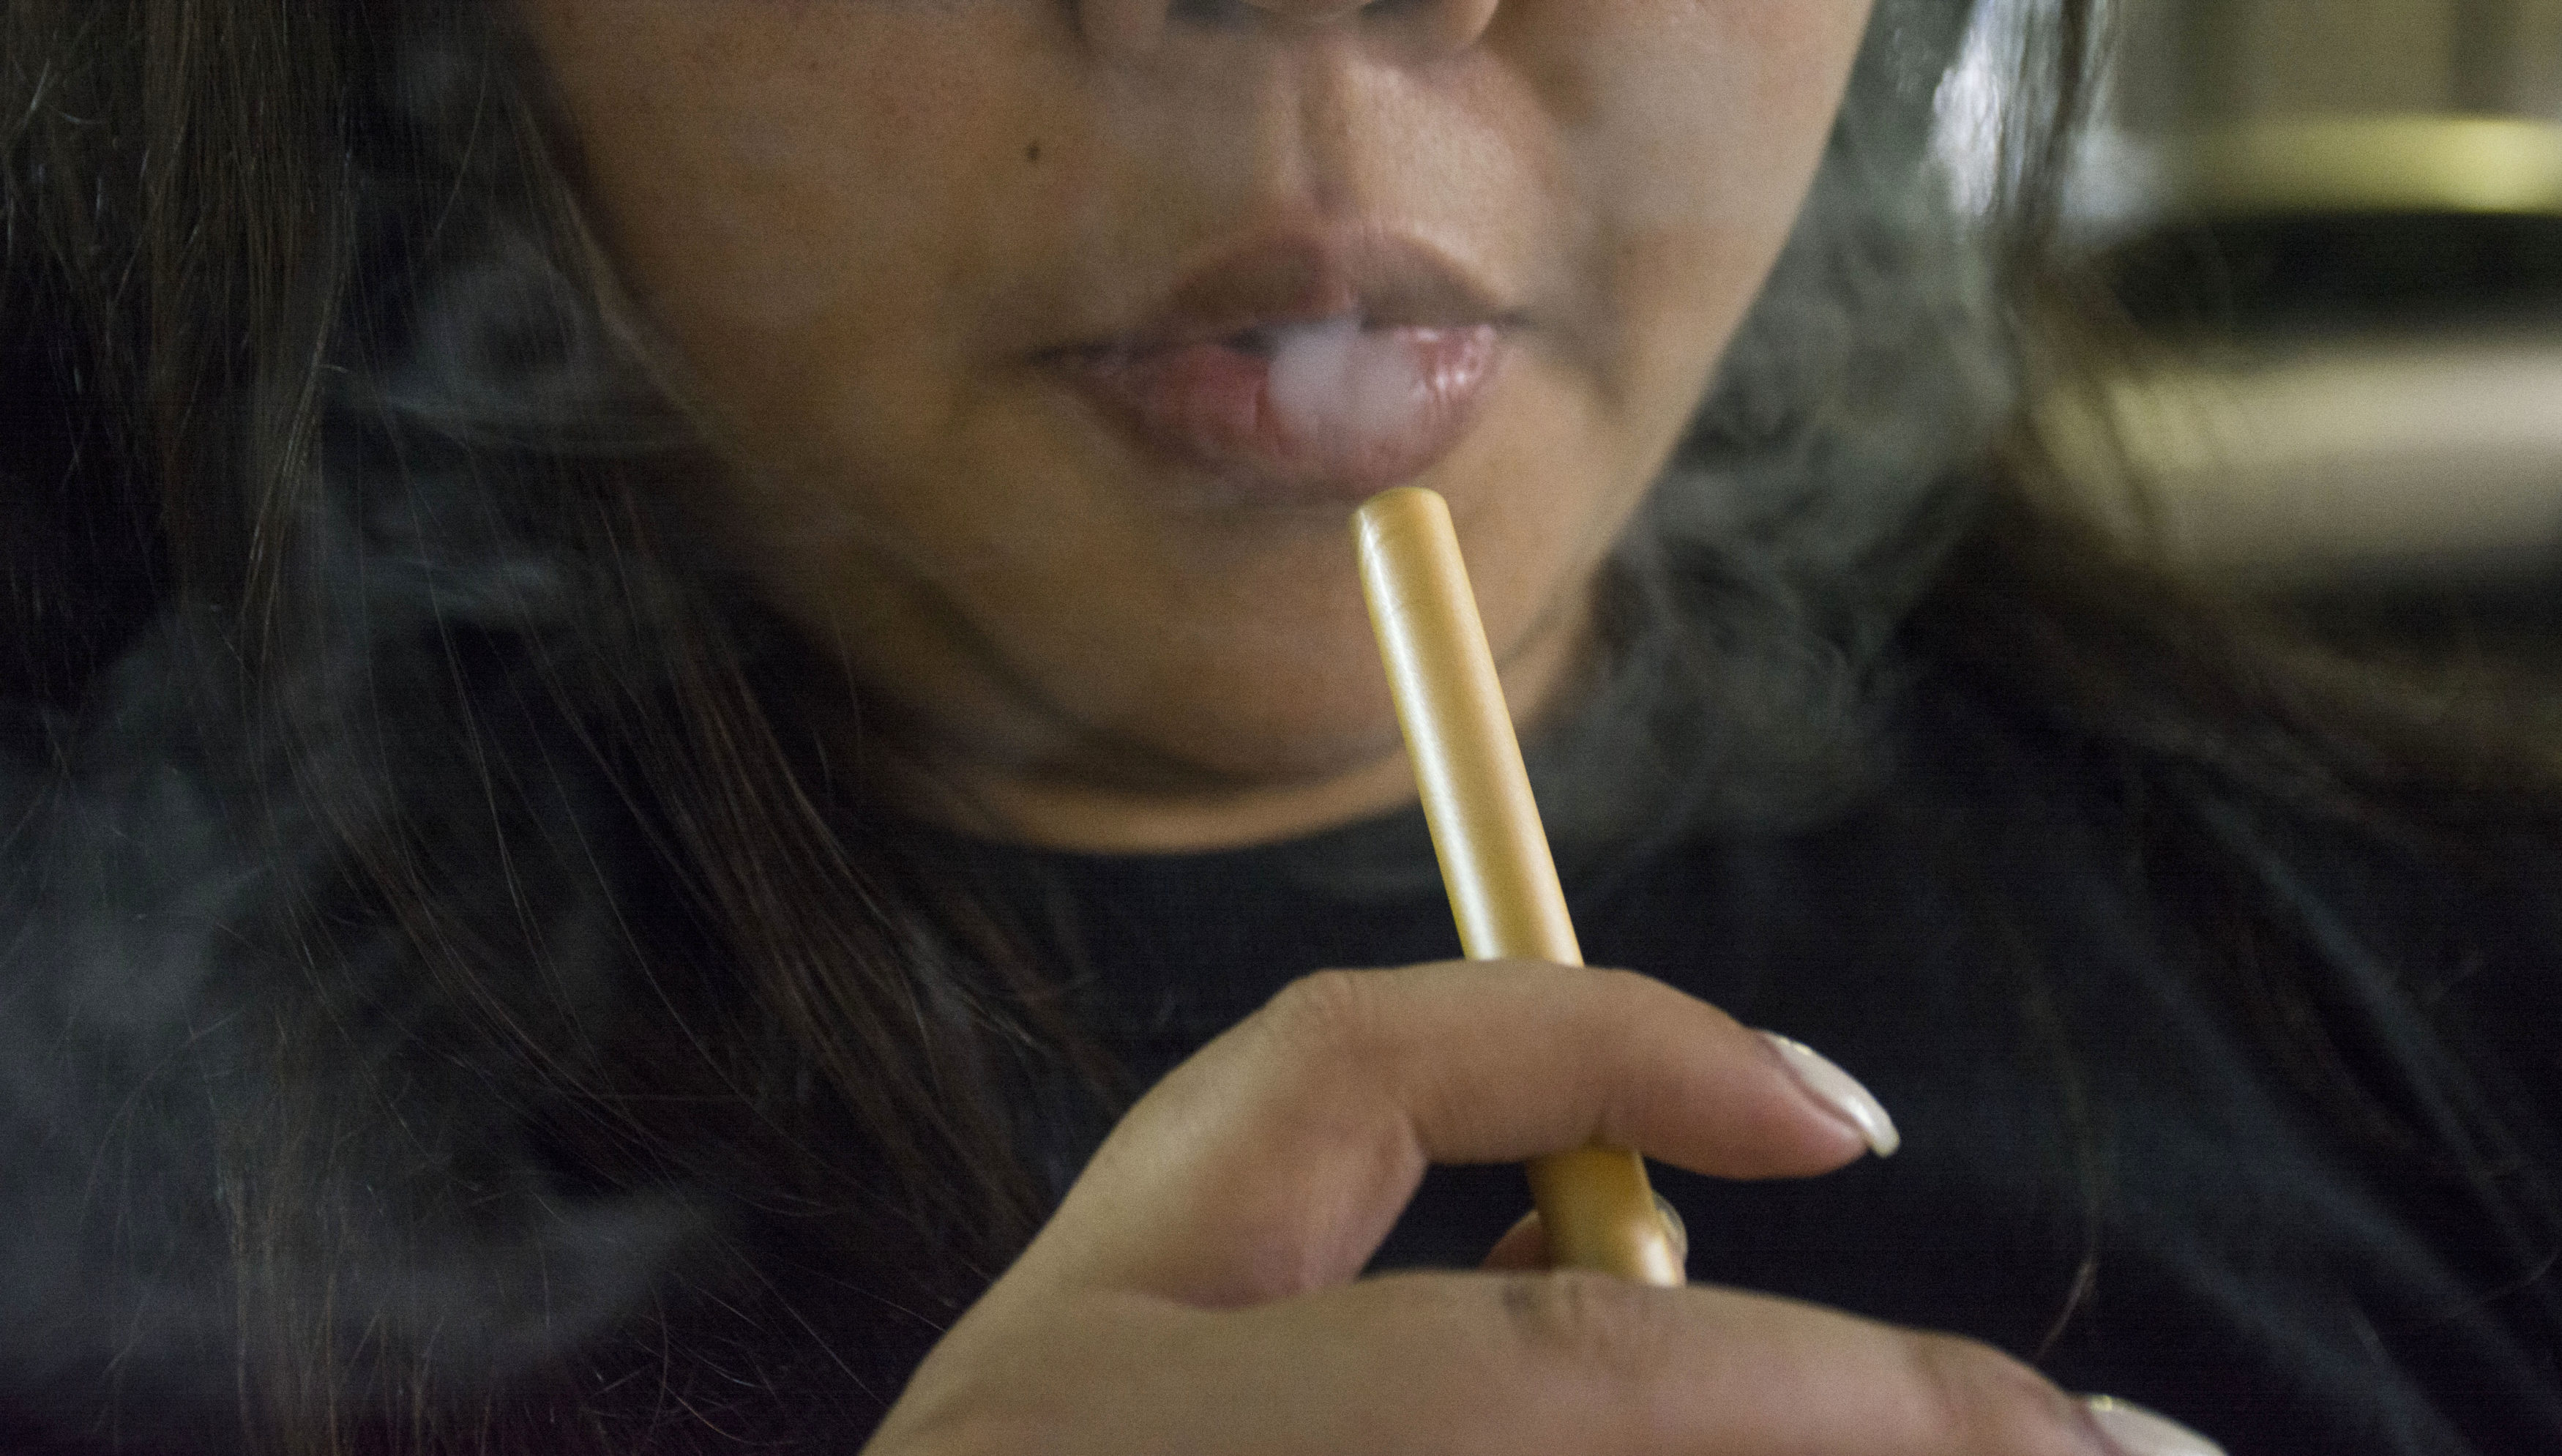 Naked Black Bitch Smoking Weed - What you don't know about Hookah pens - The Signal